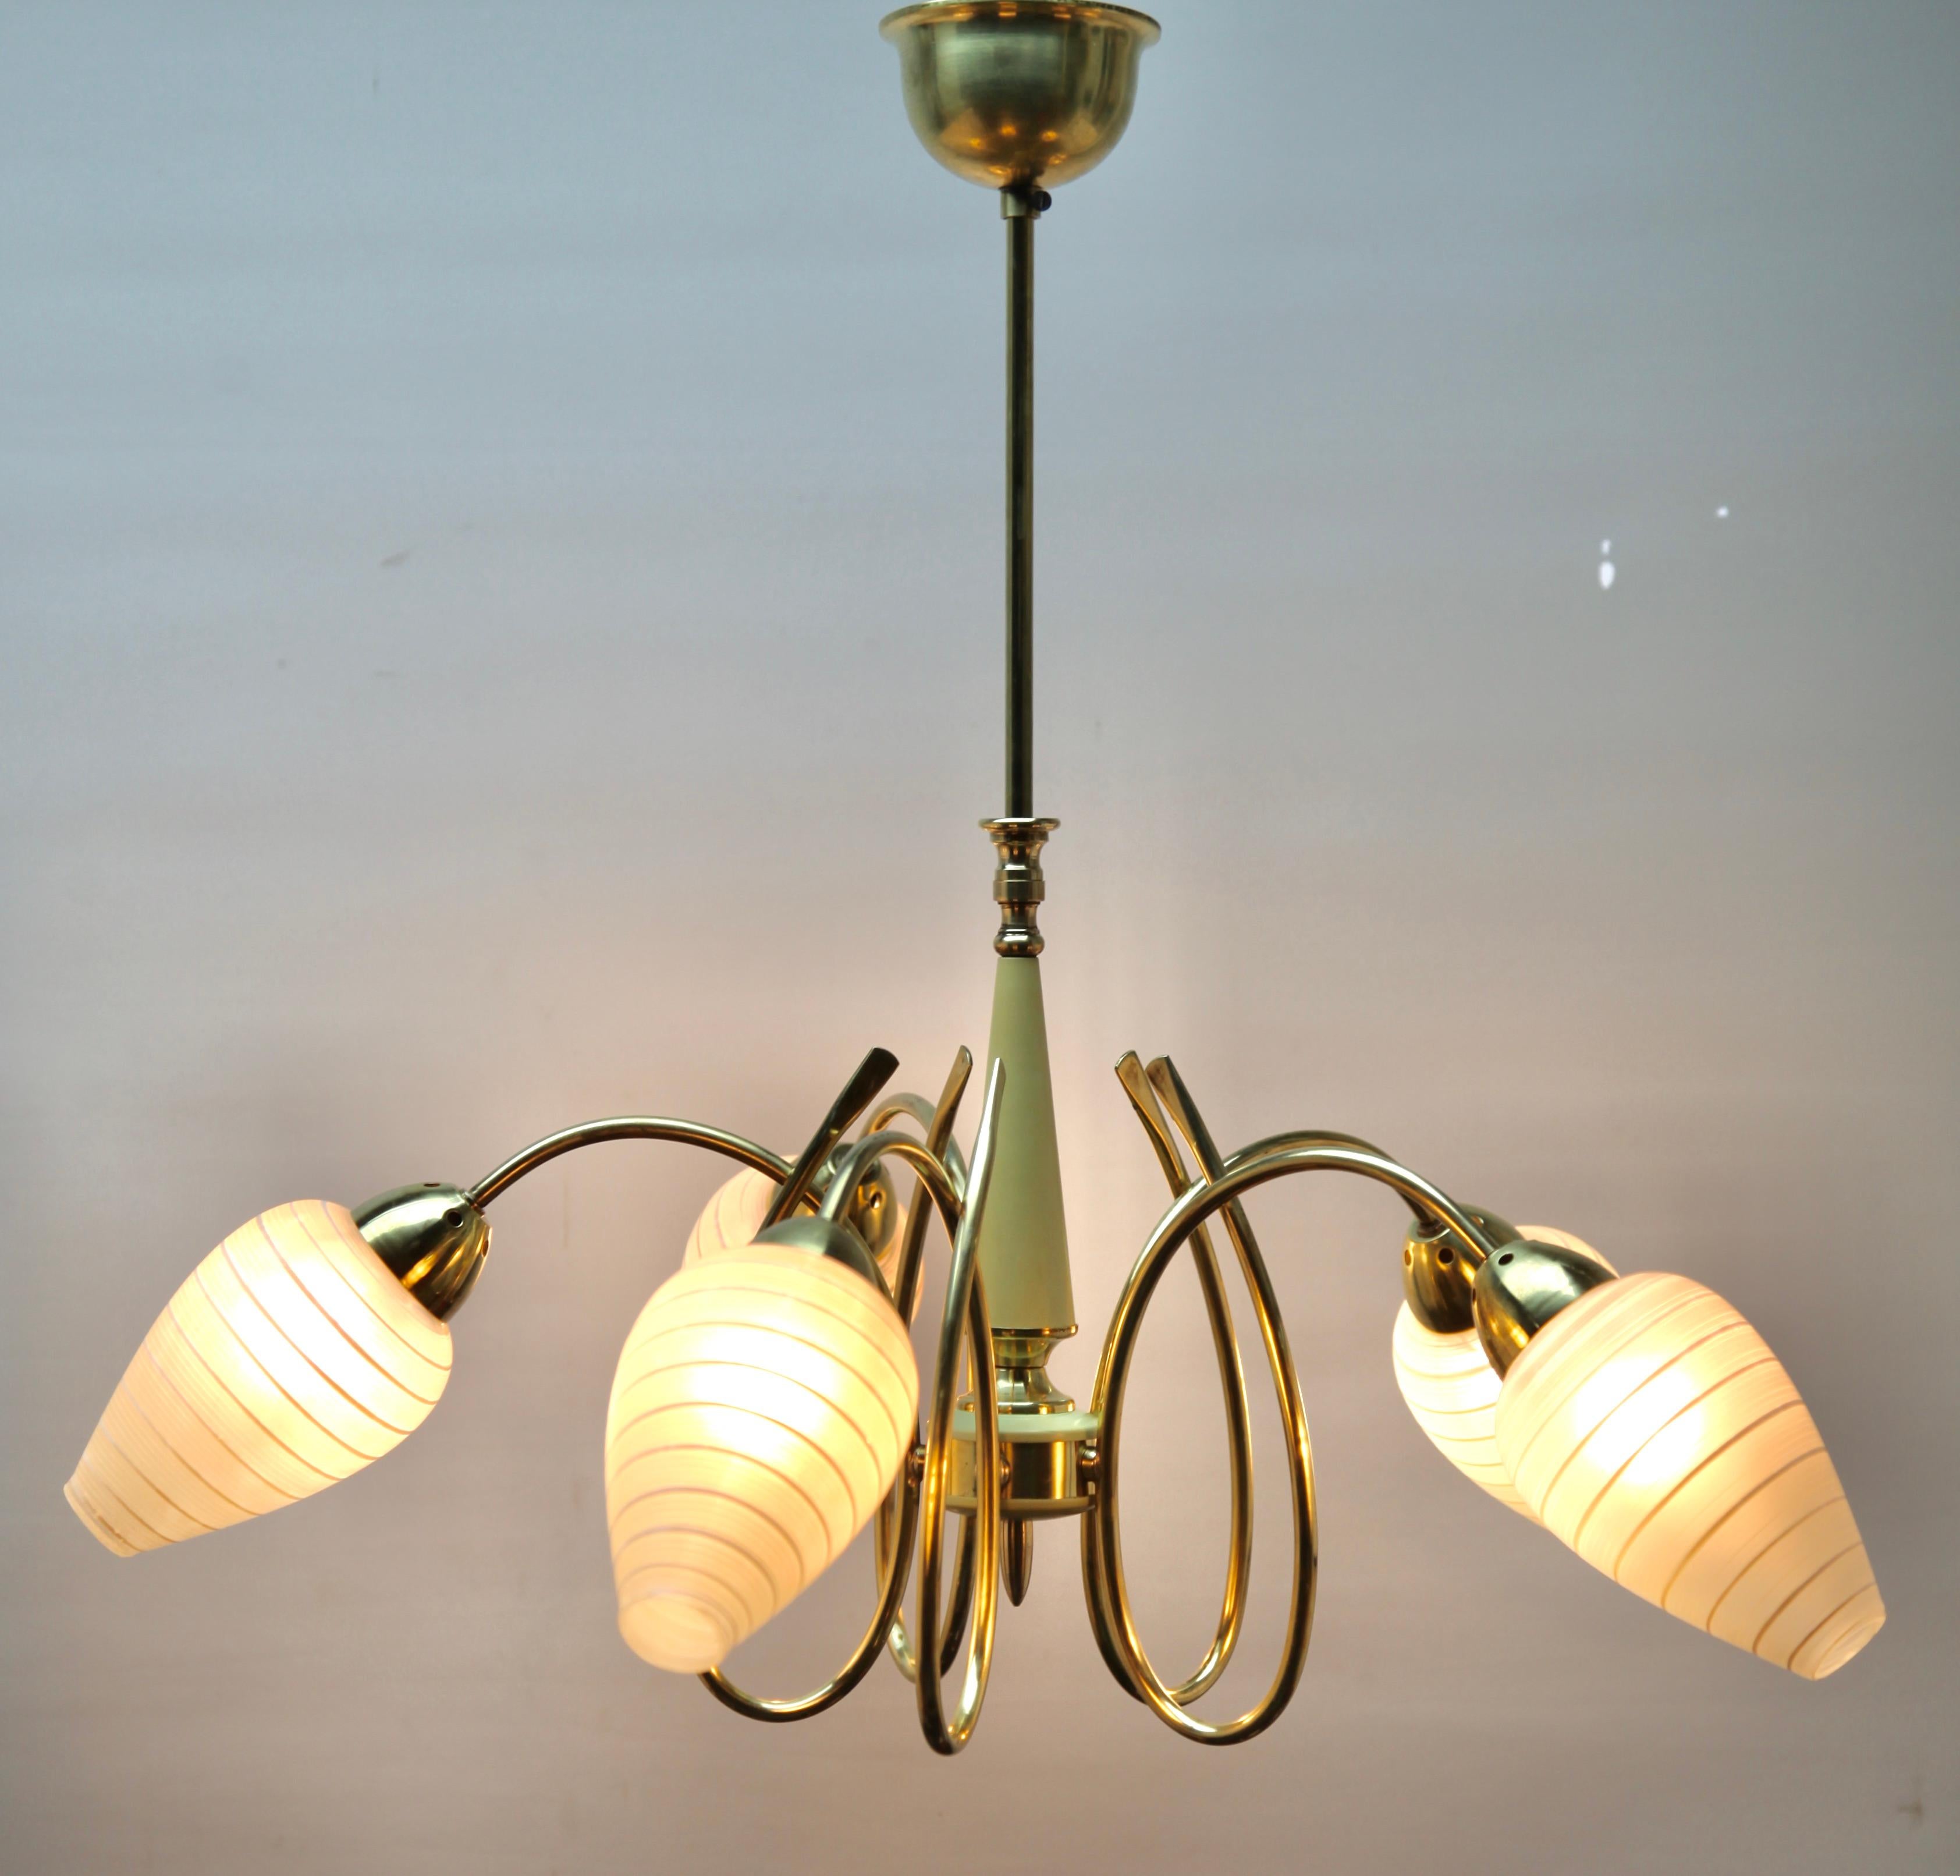 Five arms chandelier style of Stilnovo.
Photography fails to capture the simple elegant illumination provided by this lamp.

Recently cleaned and polished so that it is in excellent condition and in 
full working order 

And safe for immediate